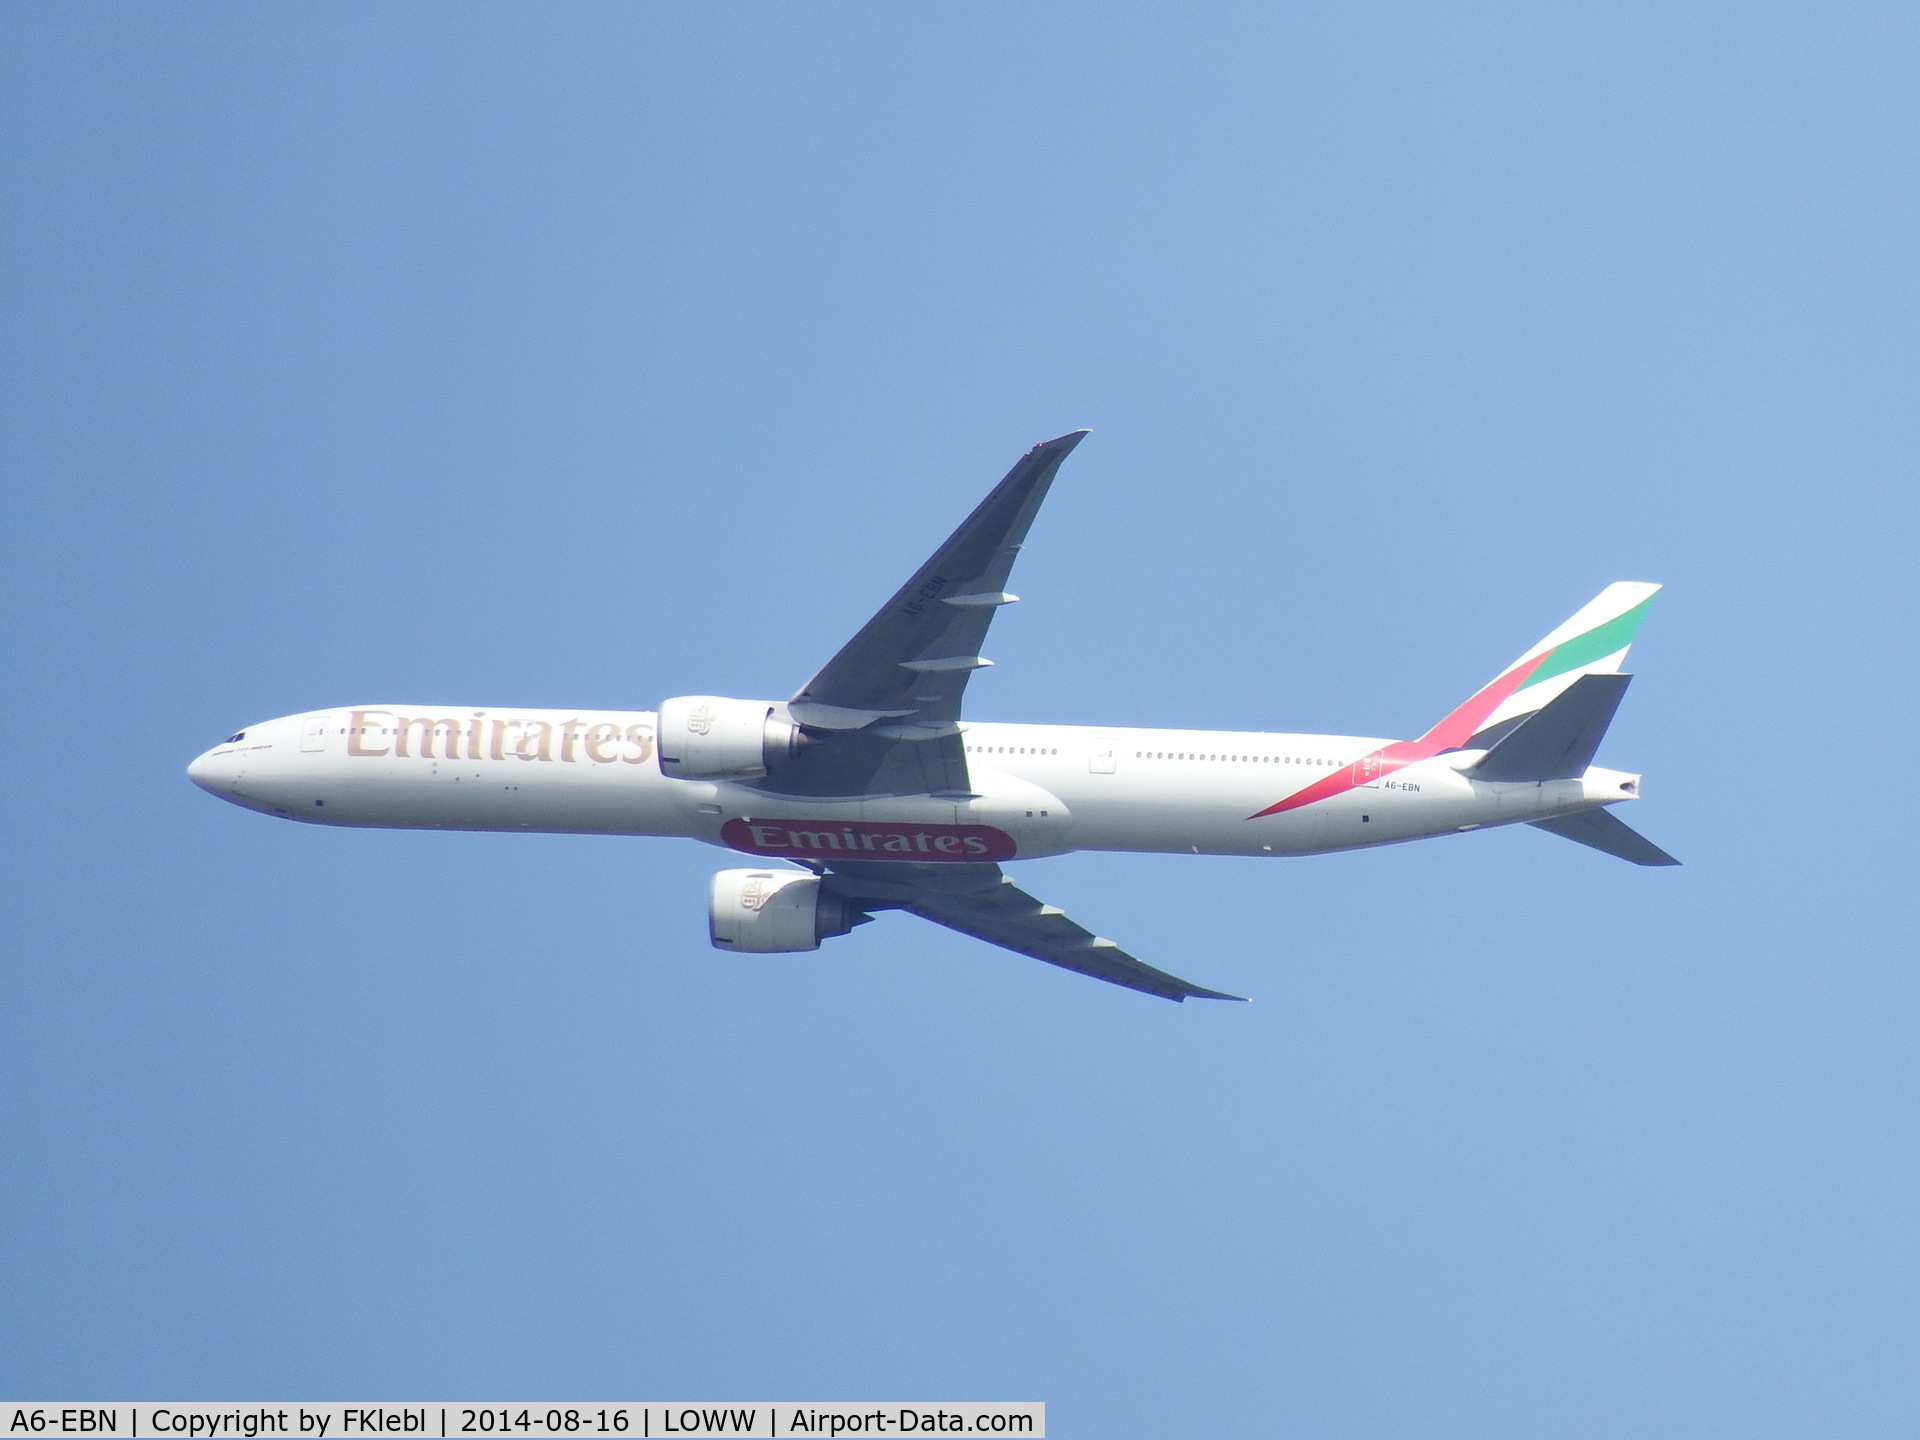 A6-EBN, 2006 Boeing 777-36N/ER C/N 32791, Boeing 777 in the livery of Emirates